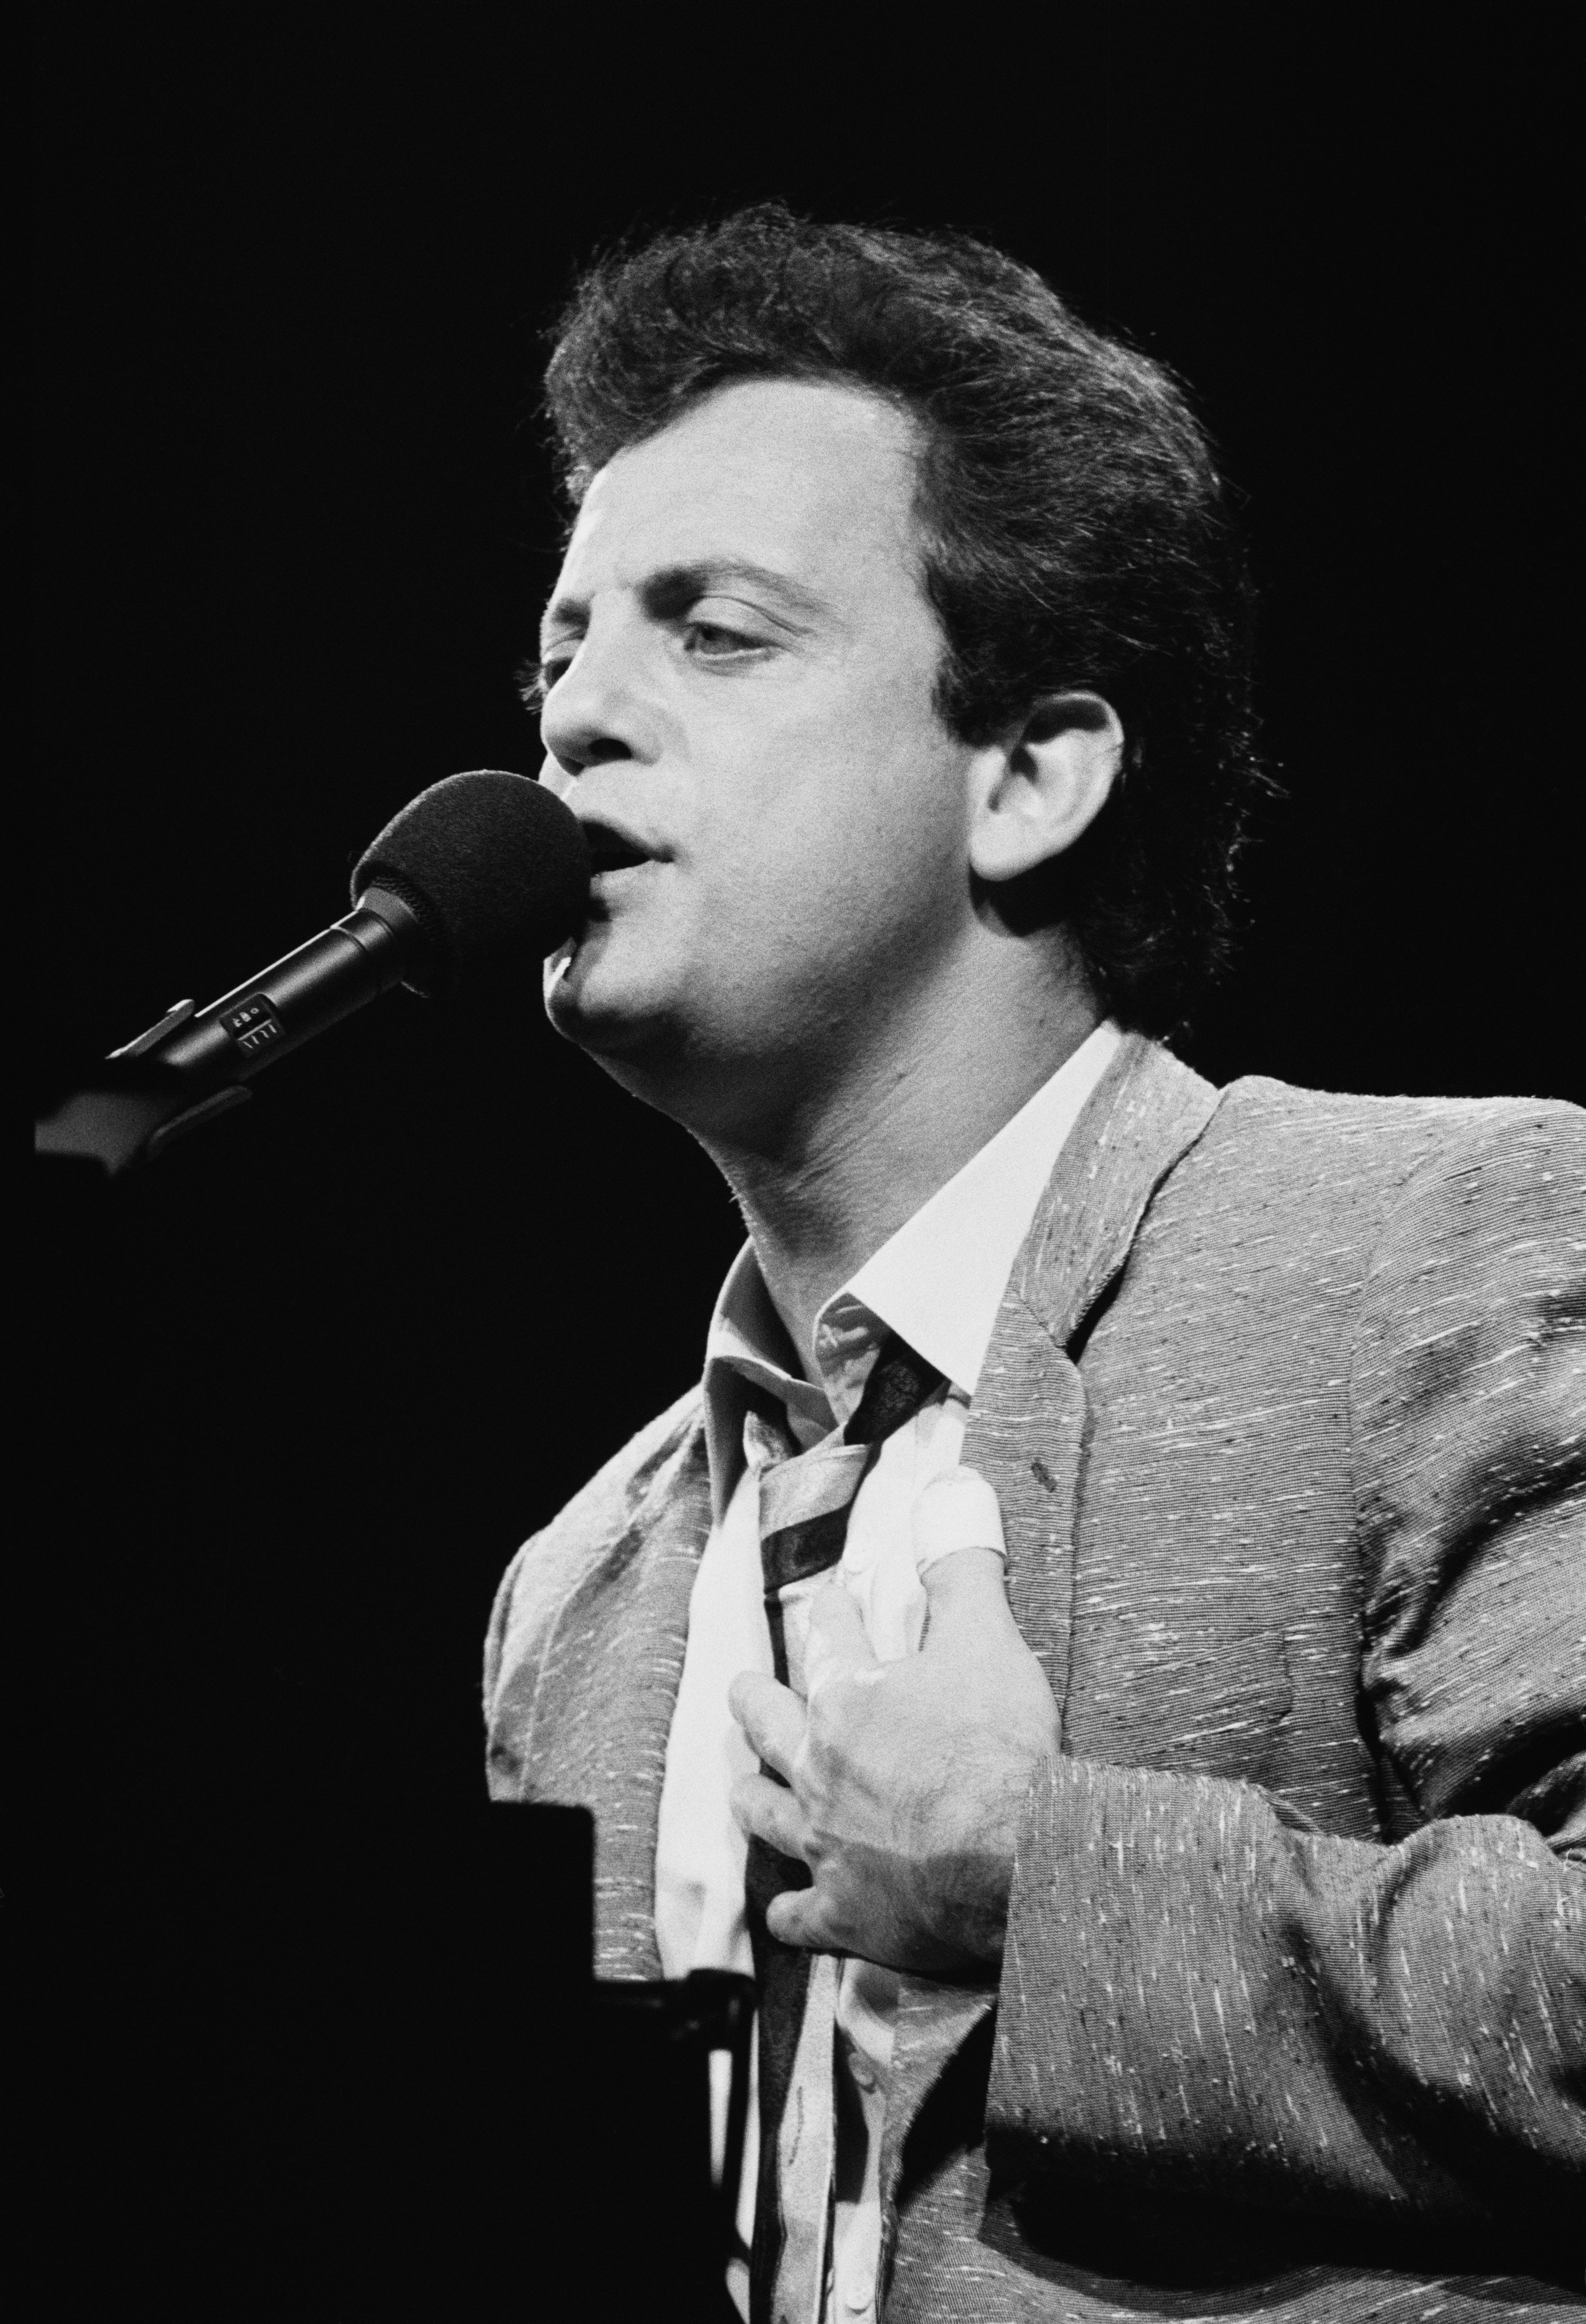 Billy Joel performing in the UK on June 7, 1984 | Source: Getty Images